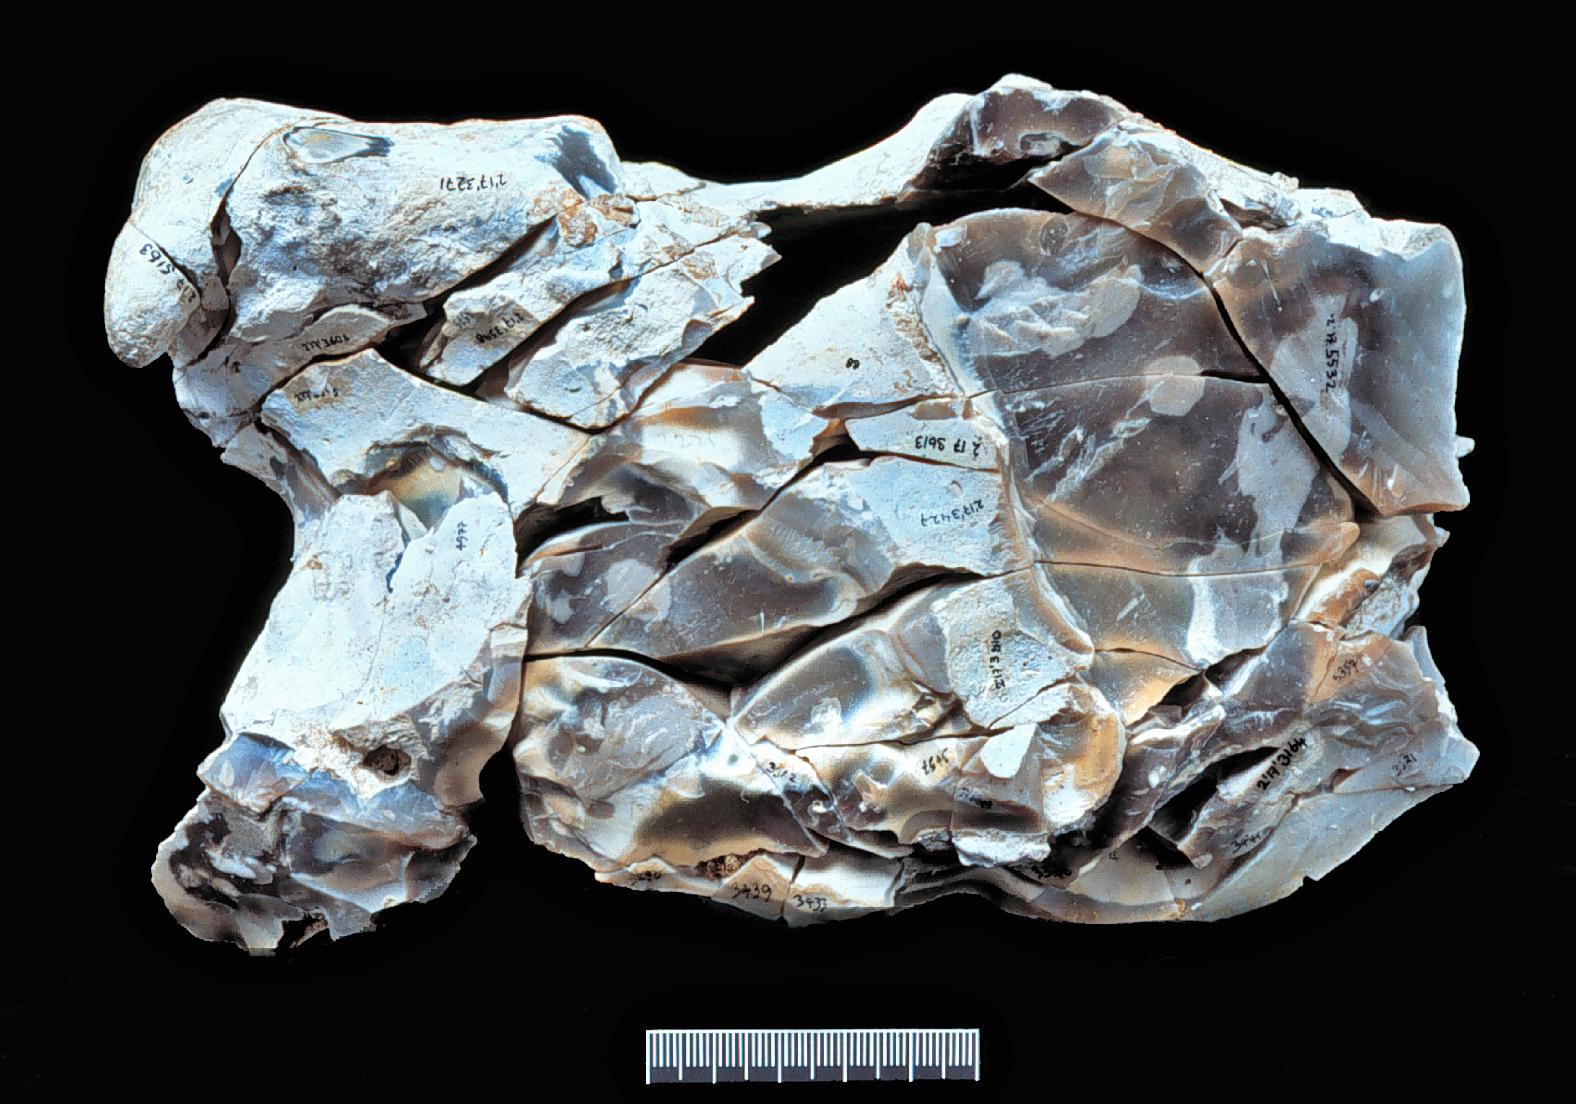 ‘The Football’, a group of over 100 refitted flint shards left over from making a single tool. The biface tool itself was not recovered, it was removed from the site by the Boxgrove people. The shape of the tool was determined by casting the void left within the reconstructed waste material. (Copyright UCL Institute of Archaeology)